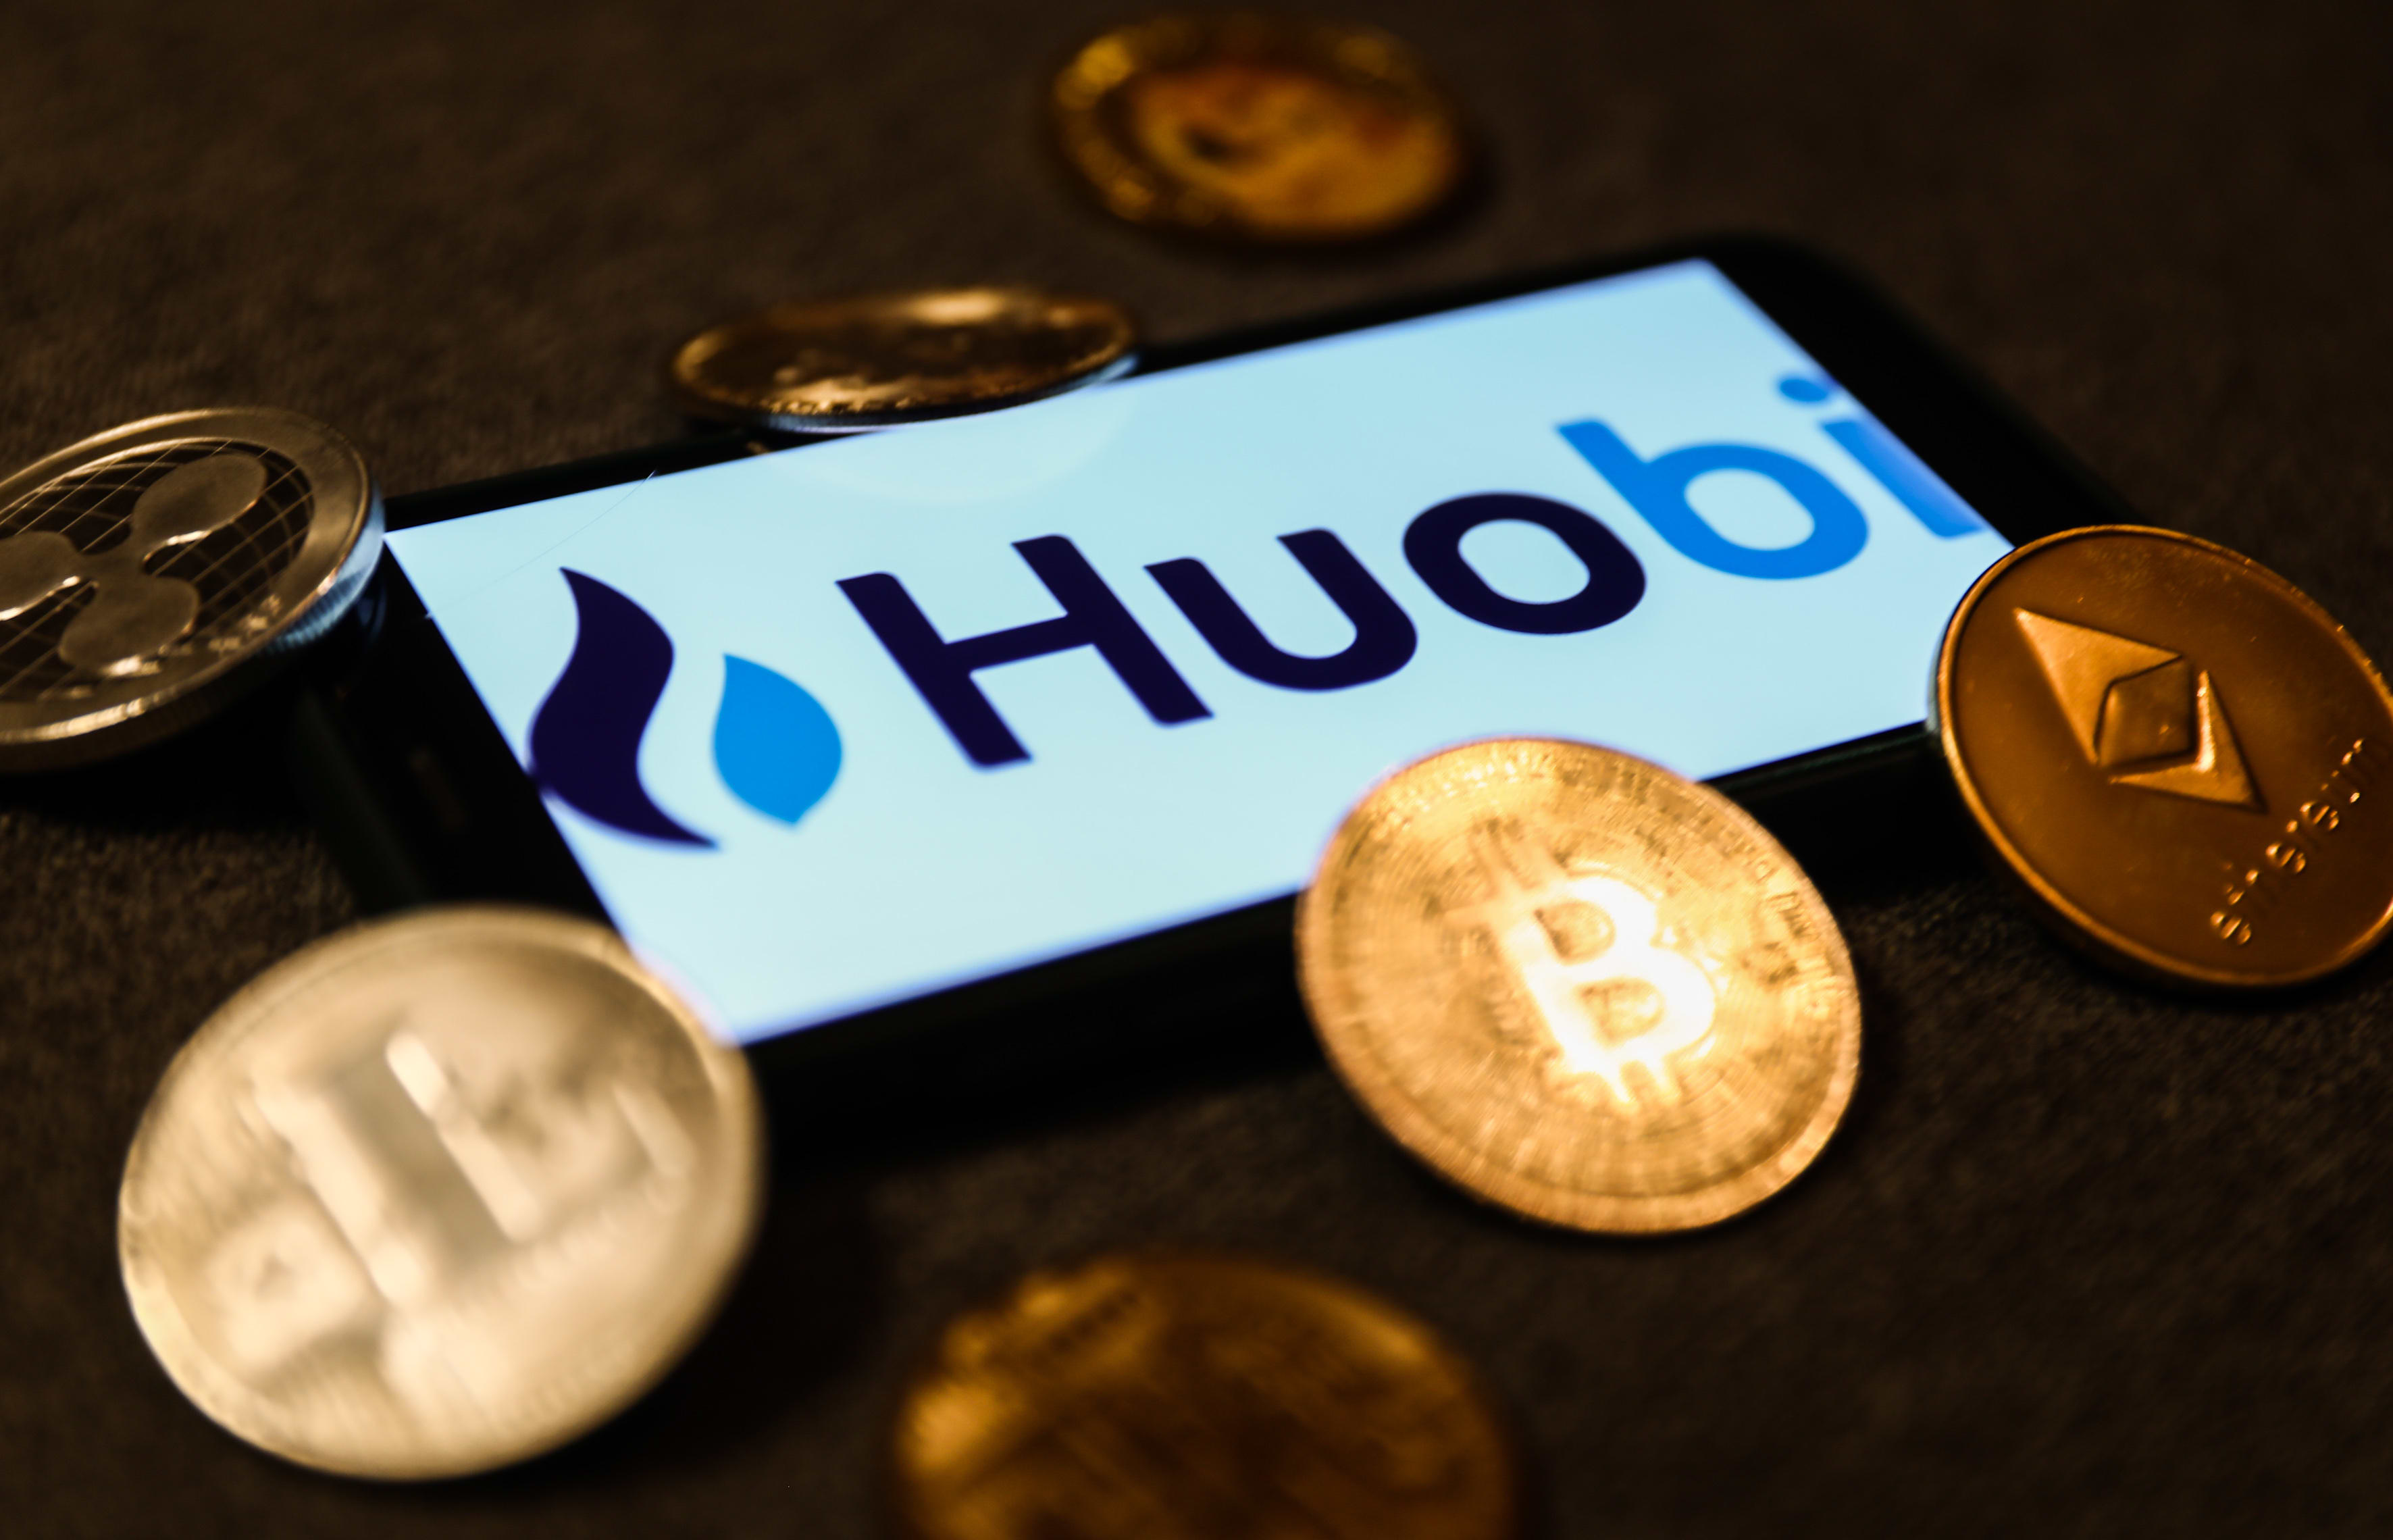 Chinese cryptocurrency exchange Huobi plans to re-enter U.S. market, but with asset management focus